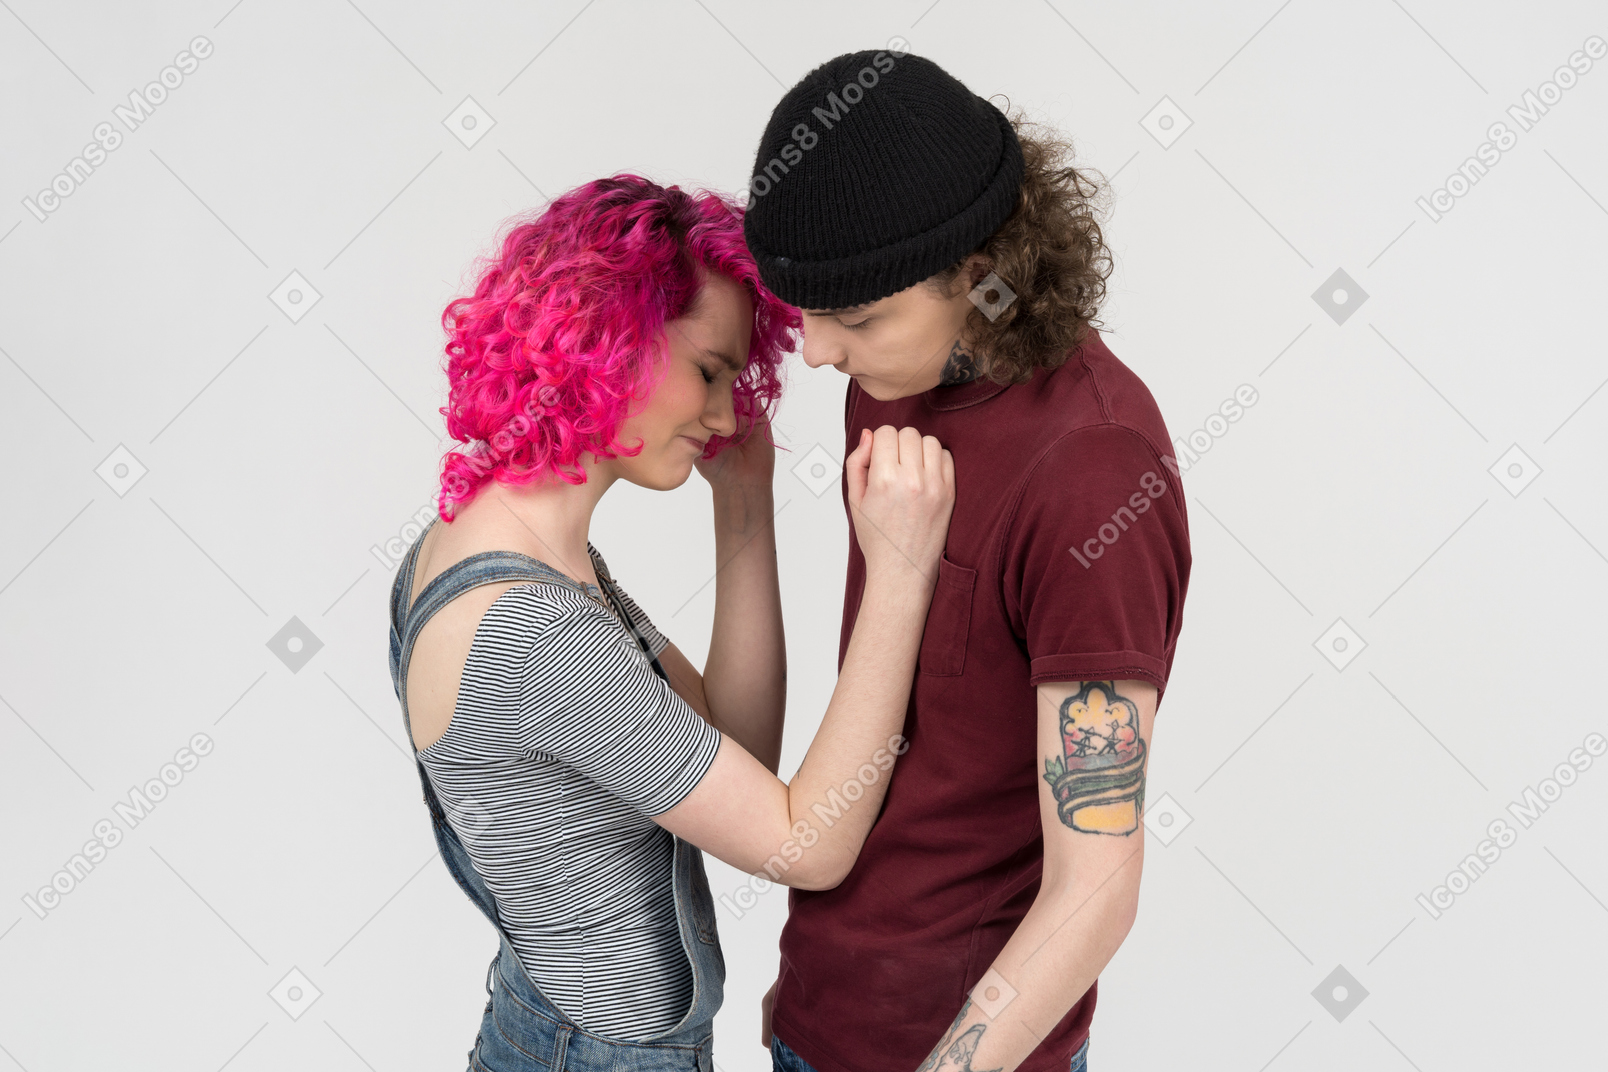 Young female stands next to her boyfriend crying